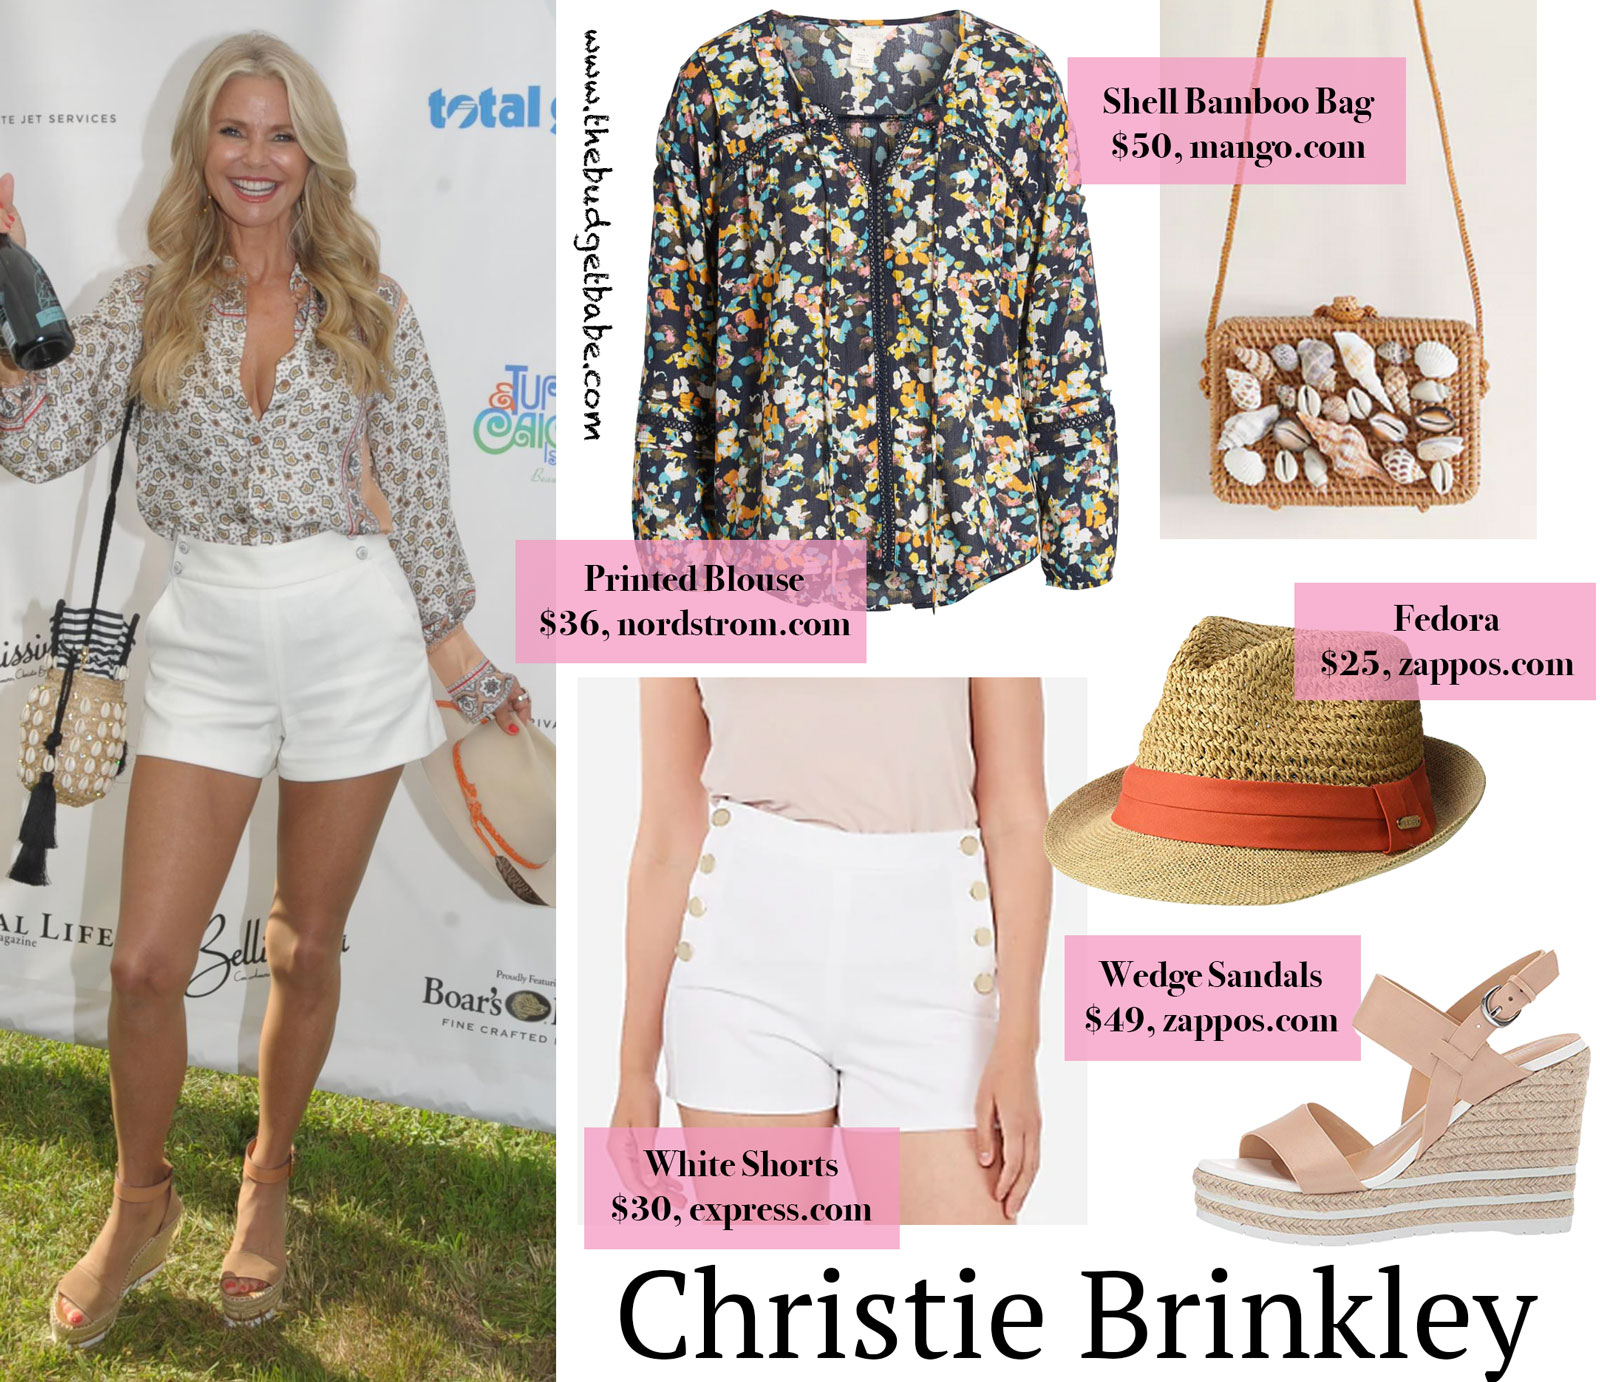 Christie Brinkley's Printed Blouse and White Shorts Look for Less